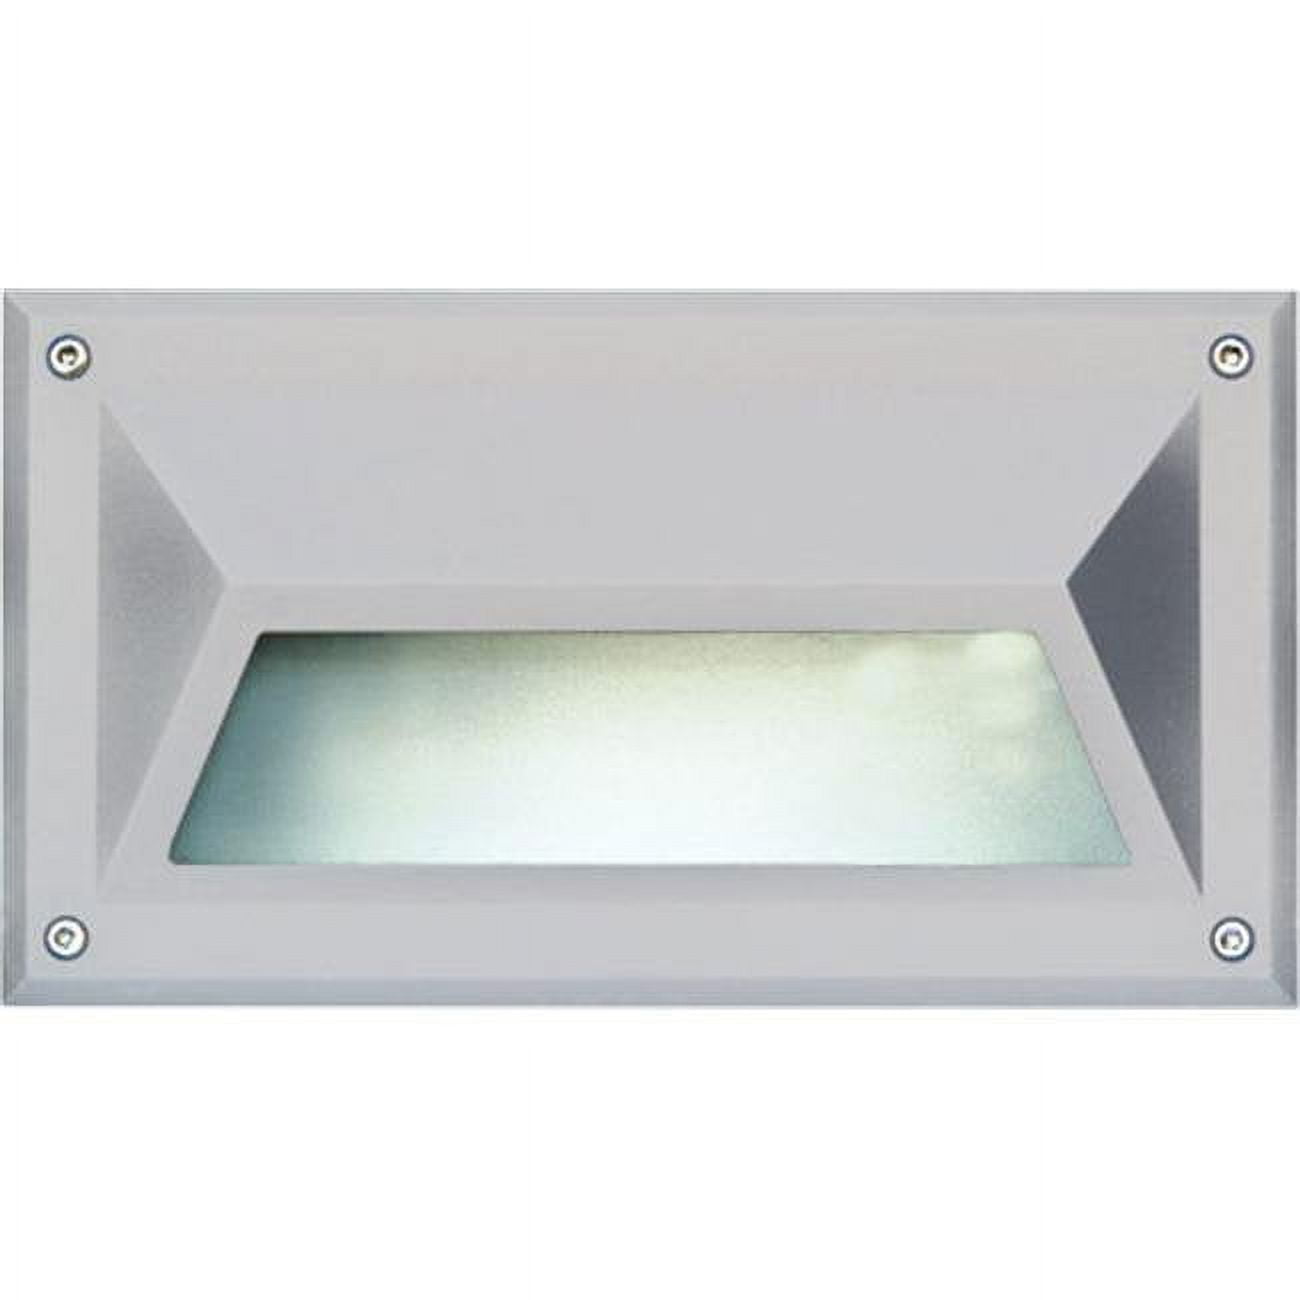 Picture of Dabmar Lighting DSL1002-W Recessed Hooded Brick, Step & Wall Light, White - 5 x 8.90 x 3.75 in.